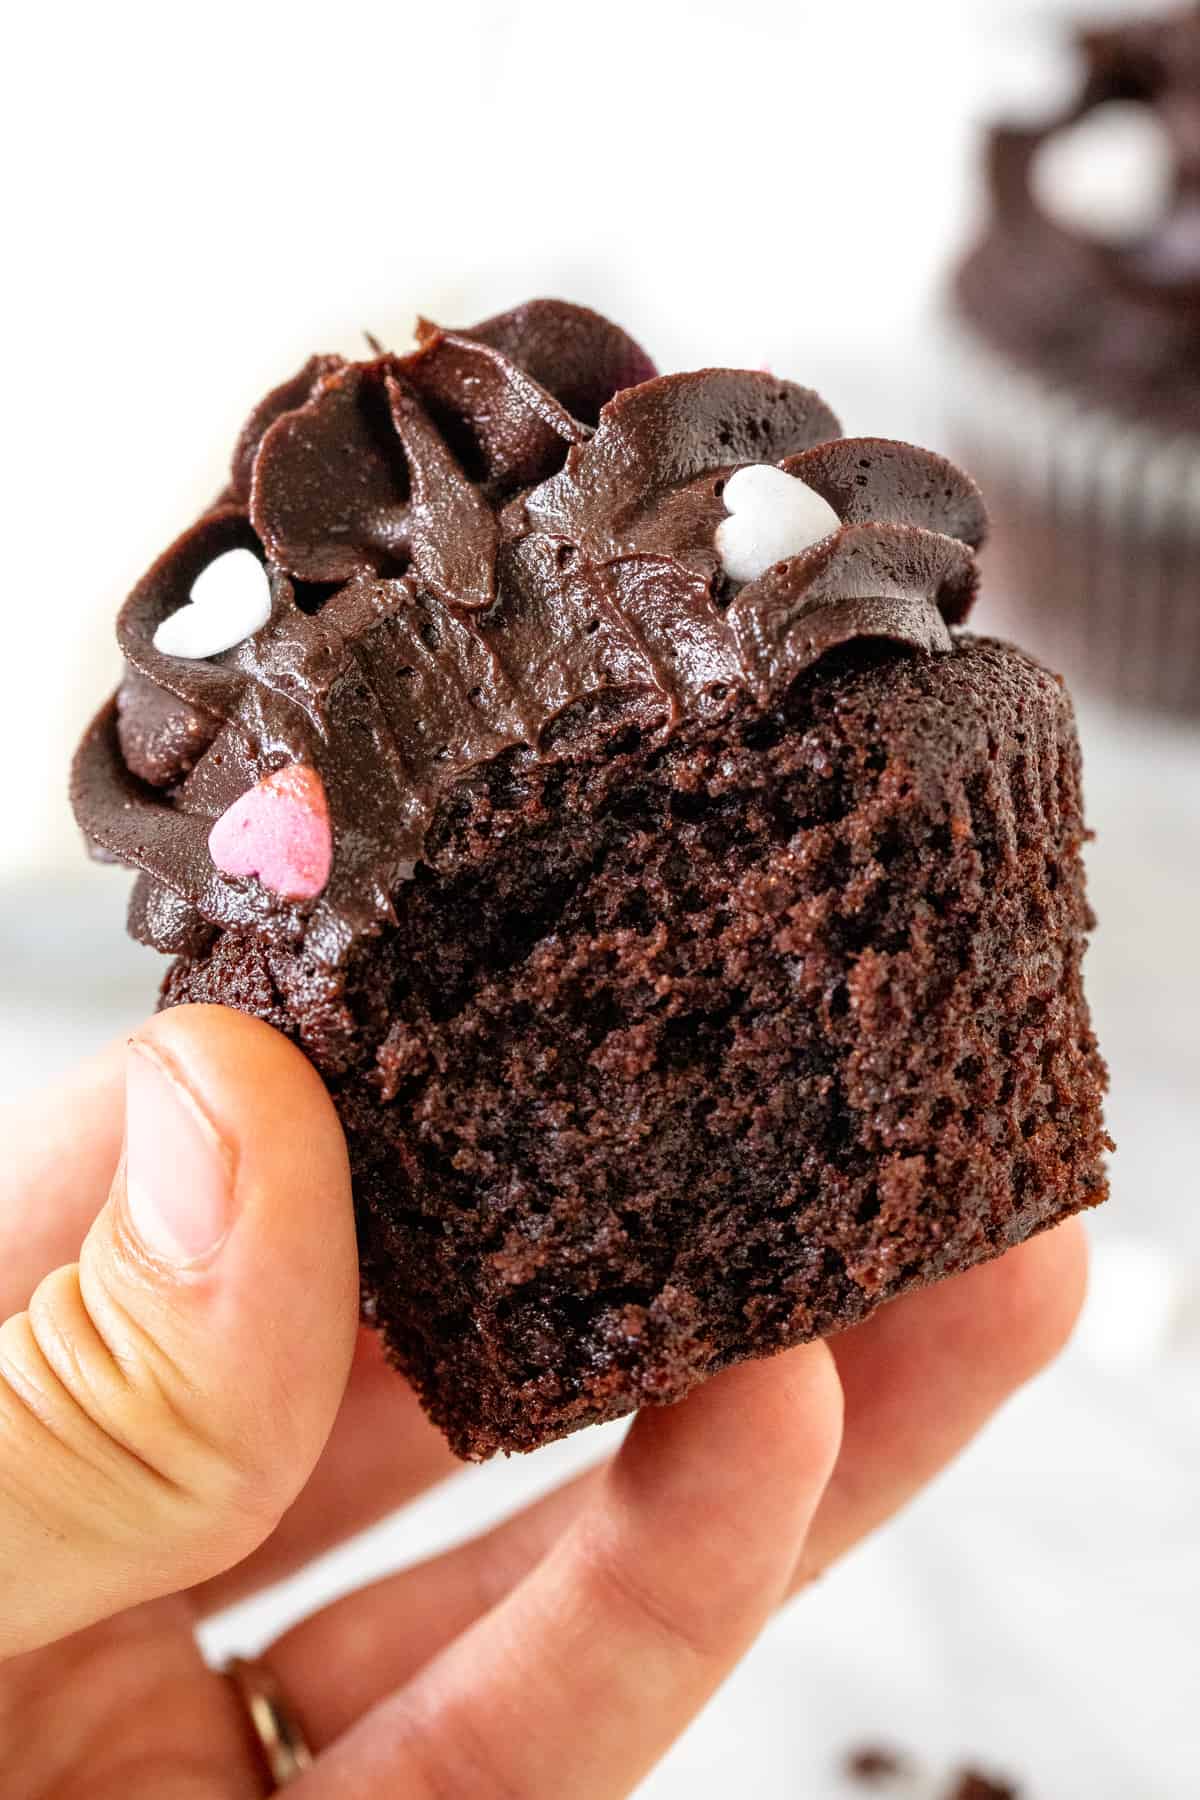 A chocolate cupcake with a bite taken out of it.